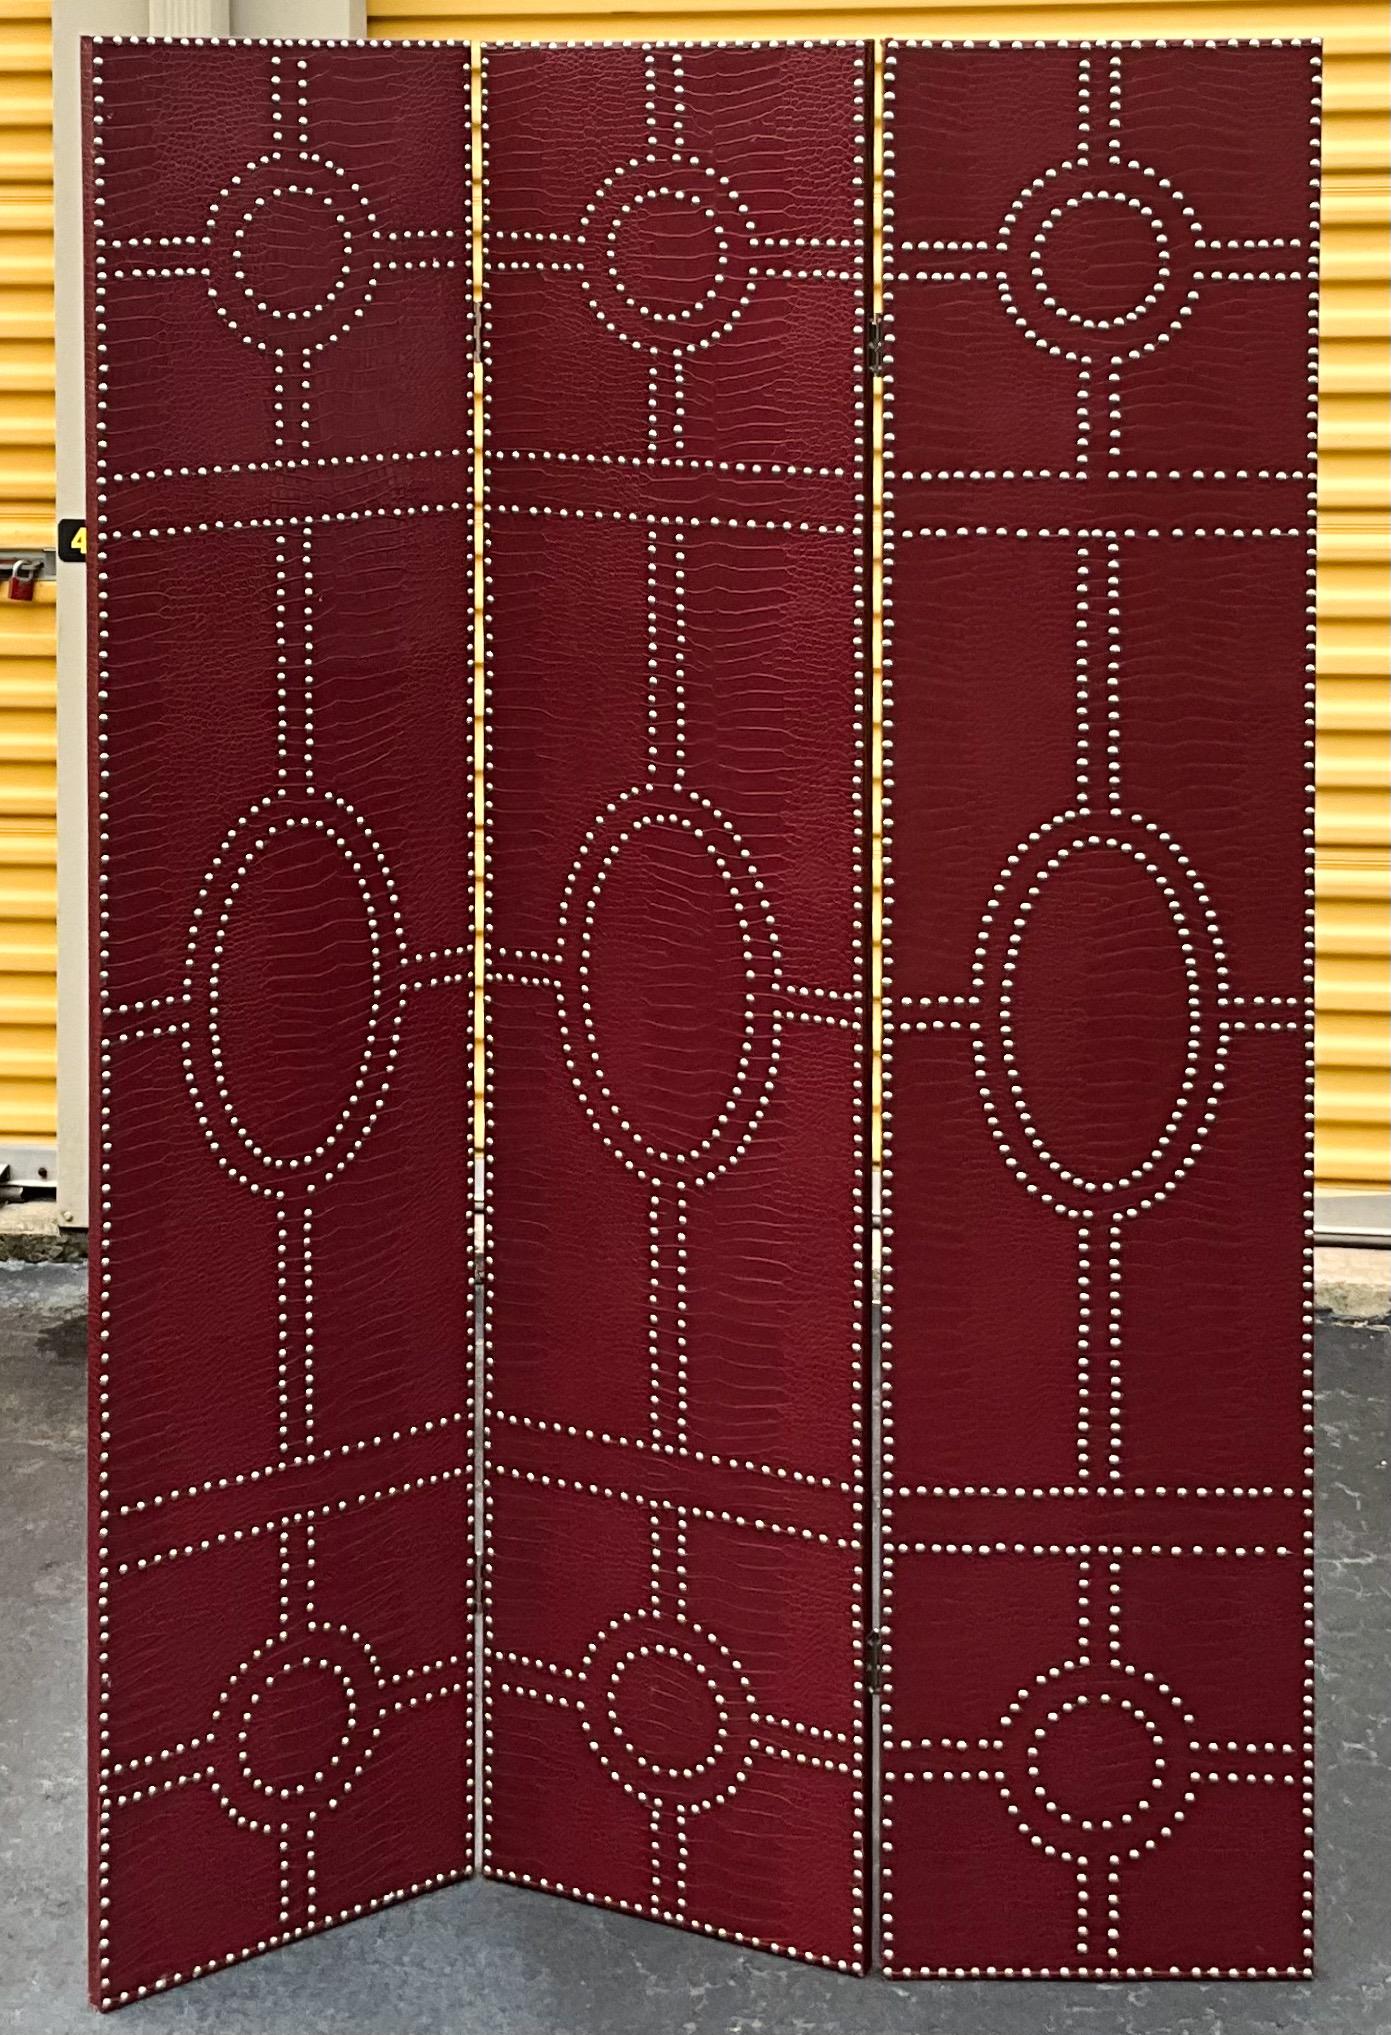 This is a handsome deep red folding screen with chrome nailheads. It has timeless appeal and would work well from wall to floor. It is unmarked and in very good condition.

My shipping is for the Continental US only, and it can run two to five